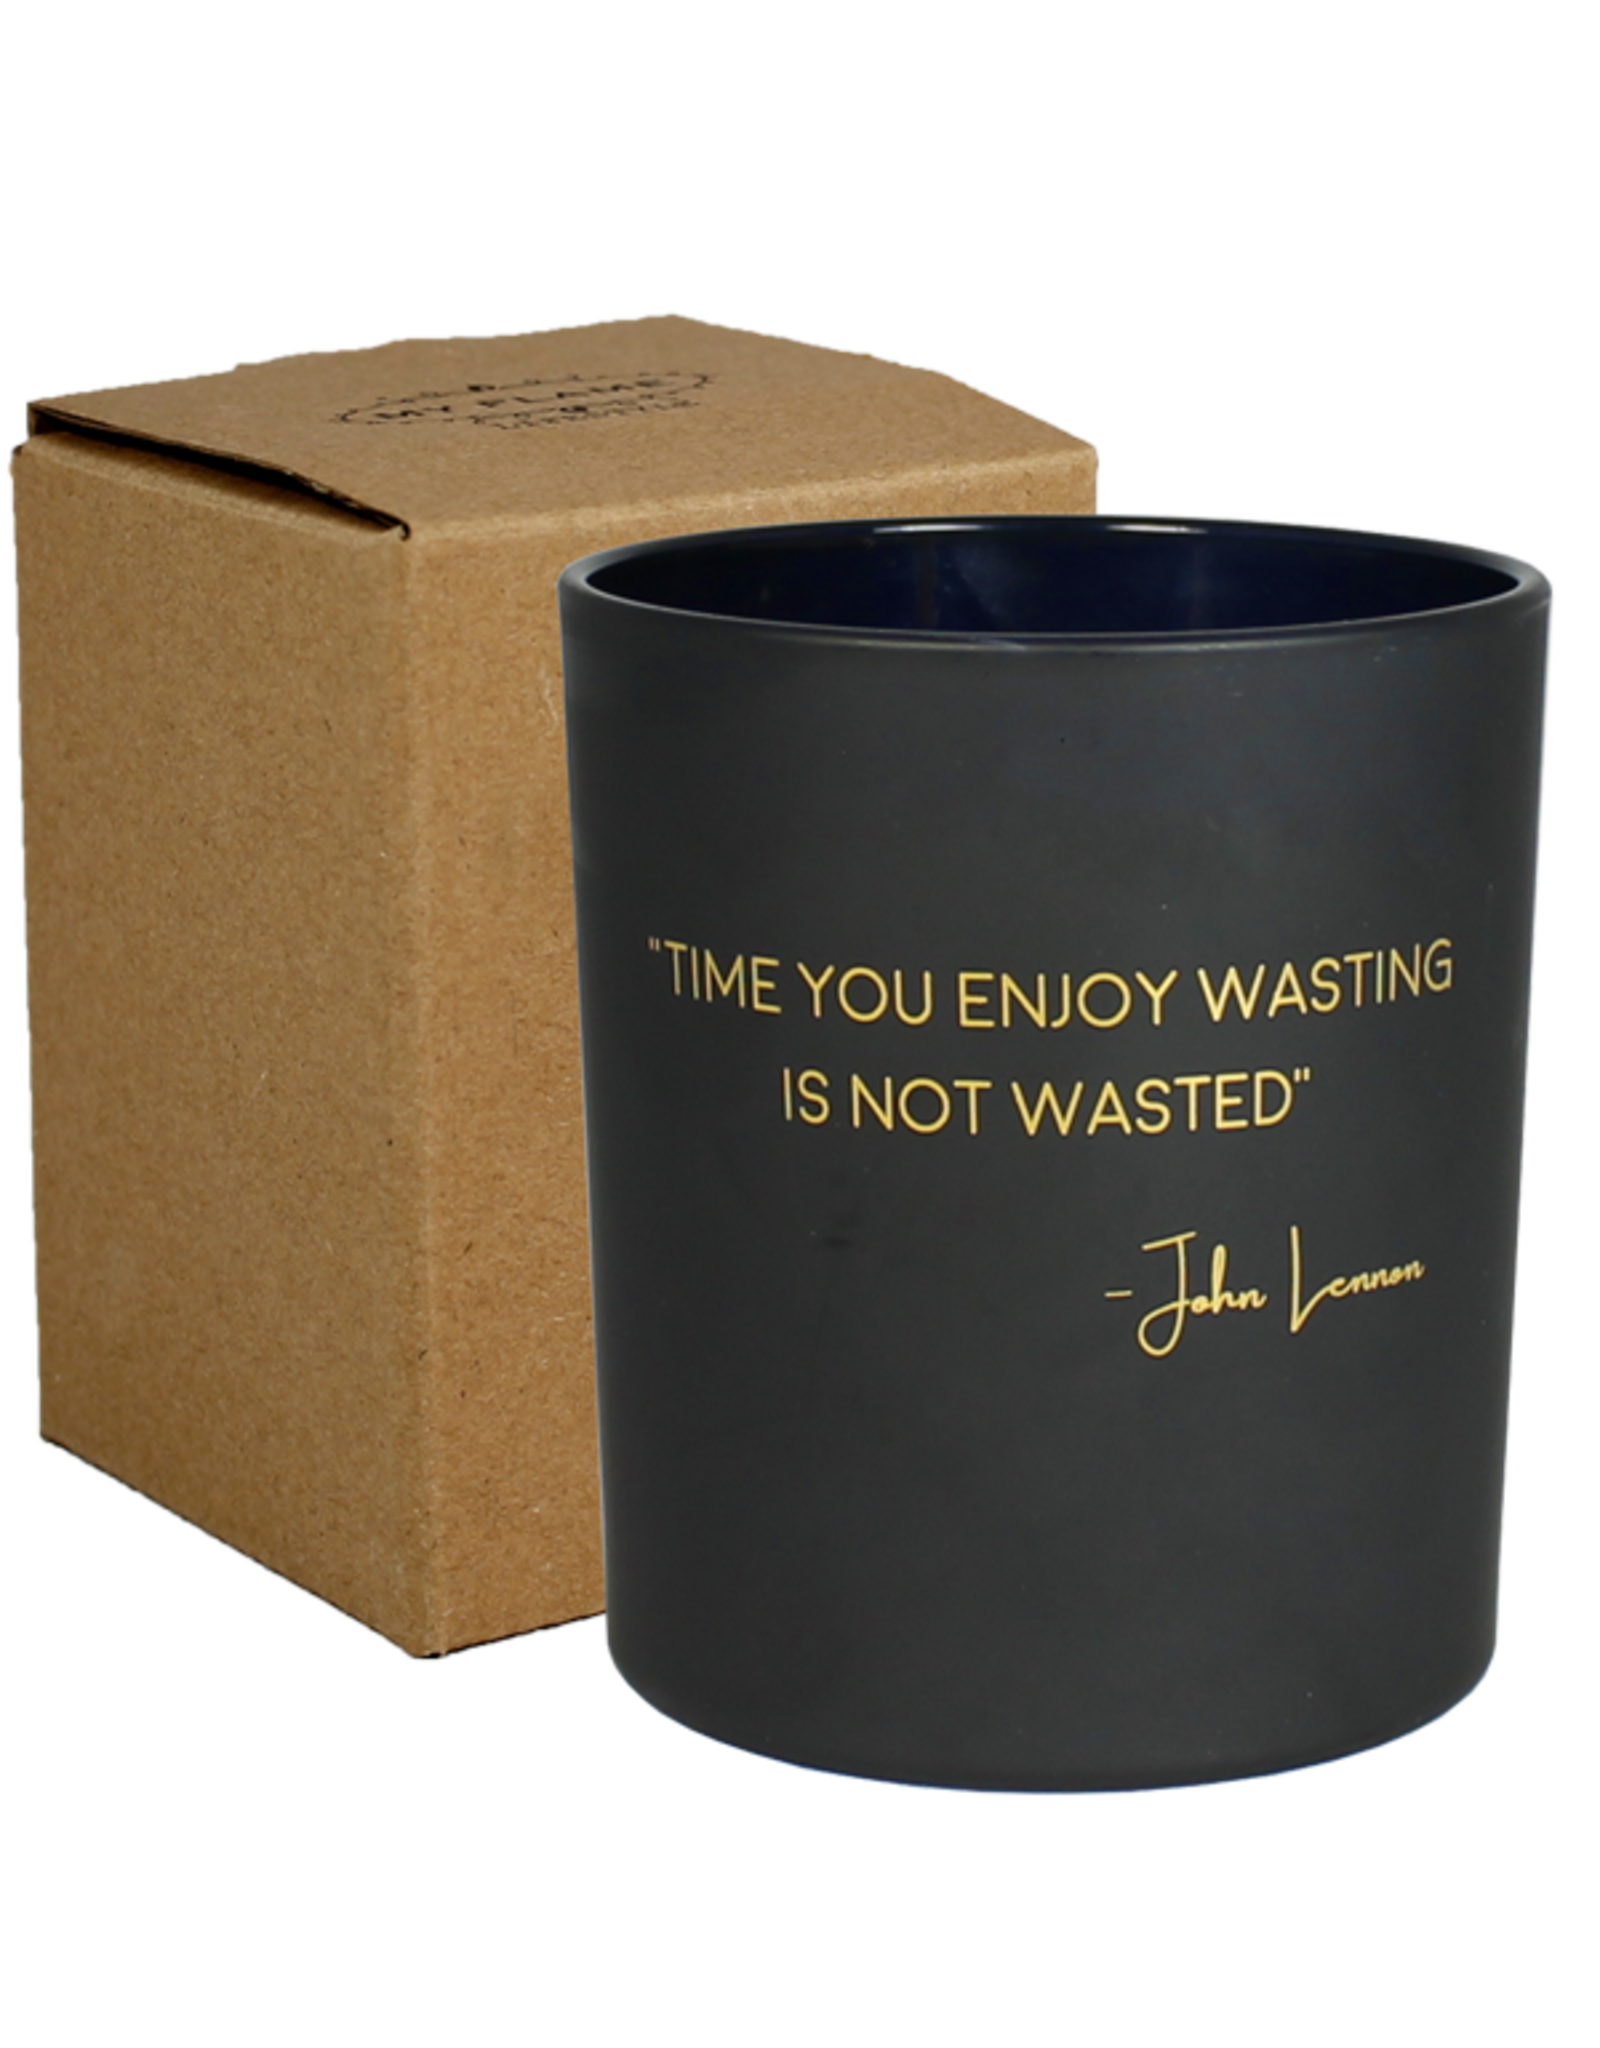 My flame Lifestyle Sojakaars | Time you Enjoy wasting is not wasted | John Lennon |Geur : Warm Cashmere